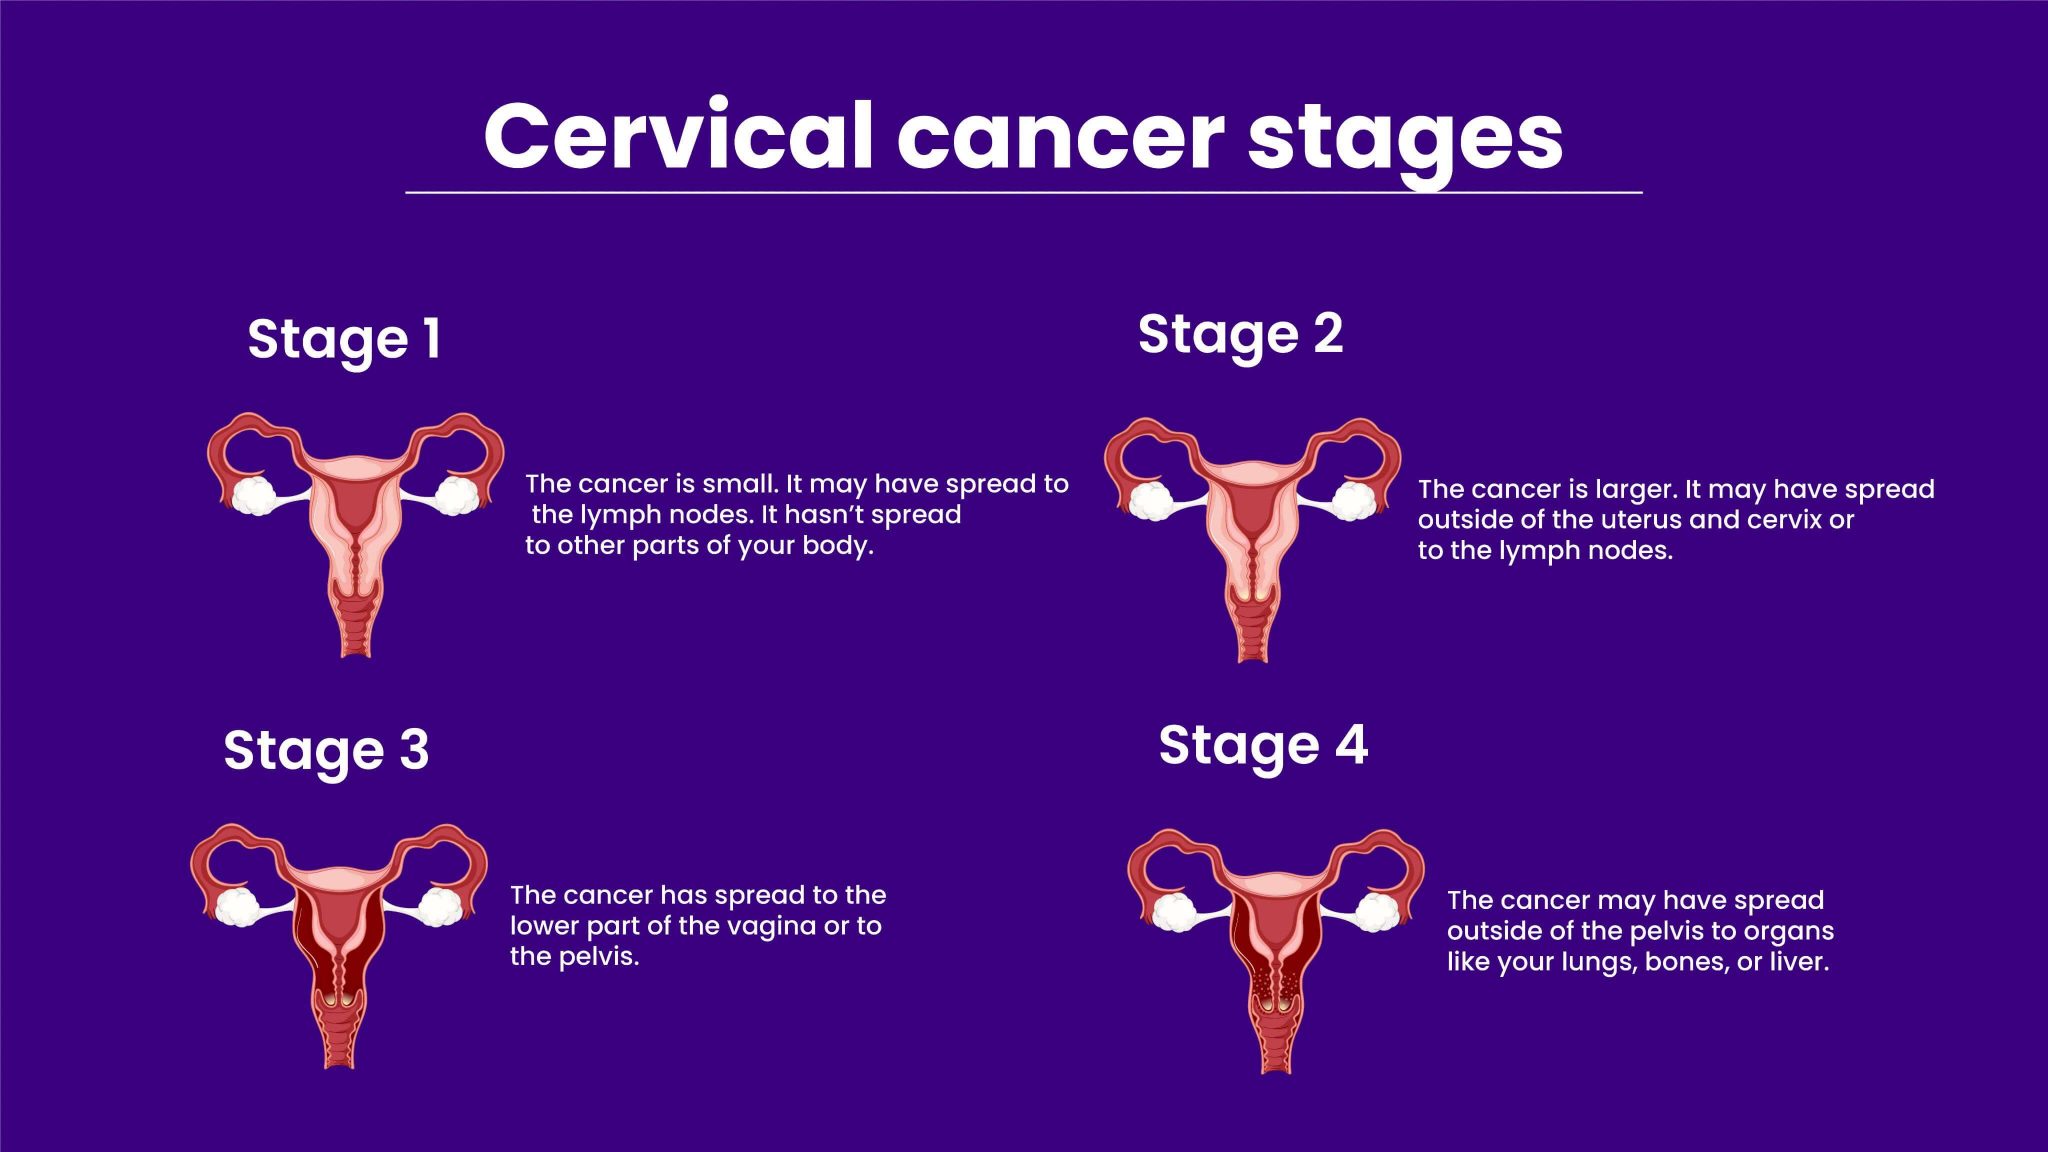 nursing research topics on cervical cancer